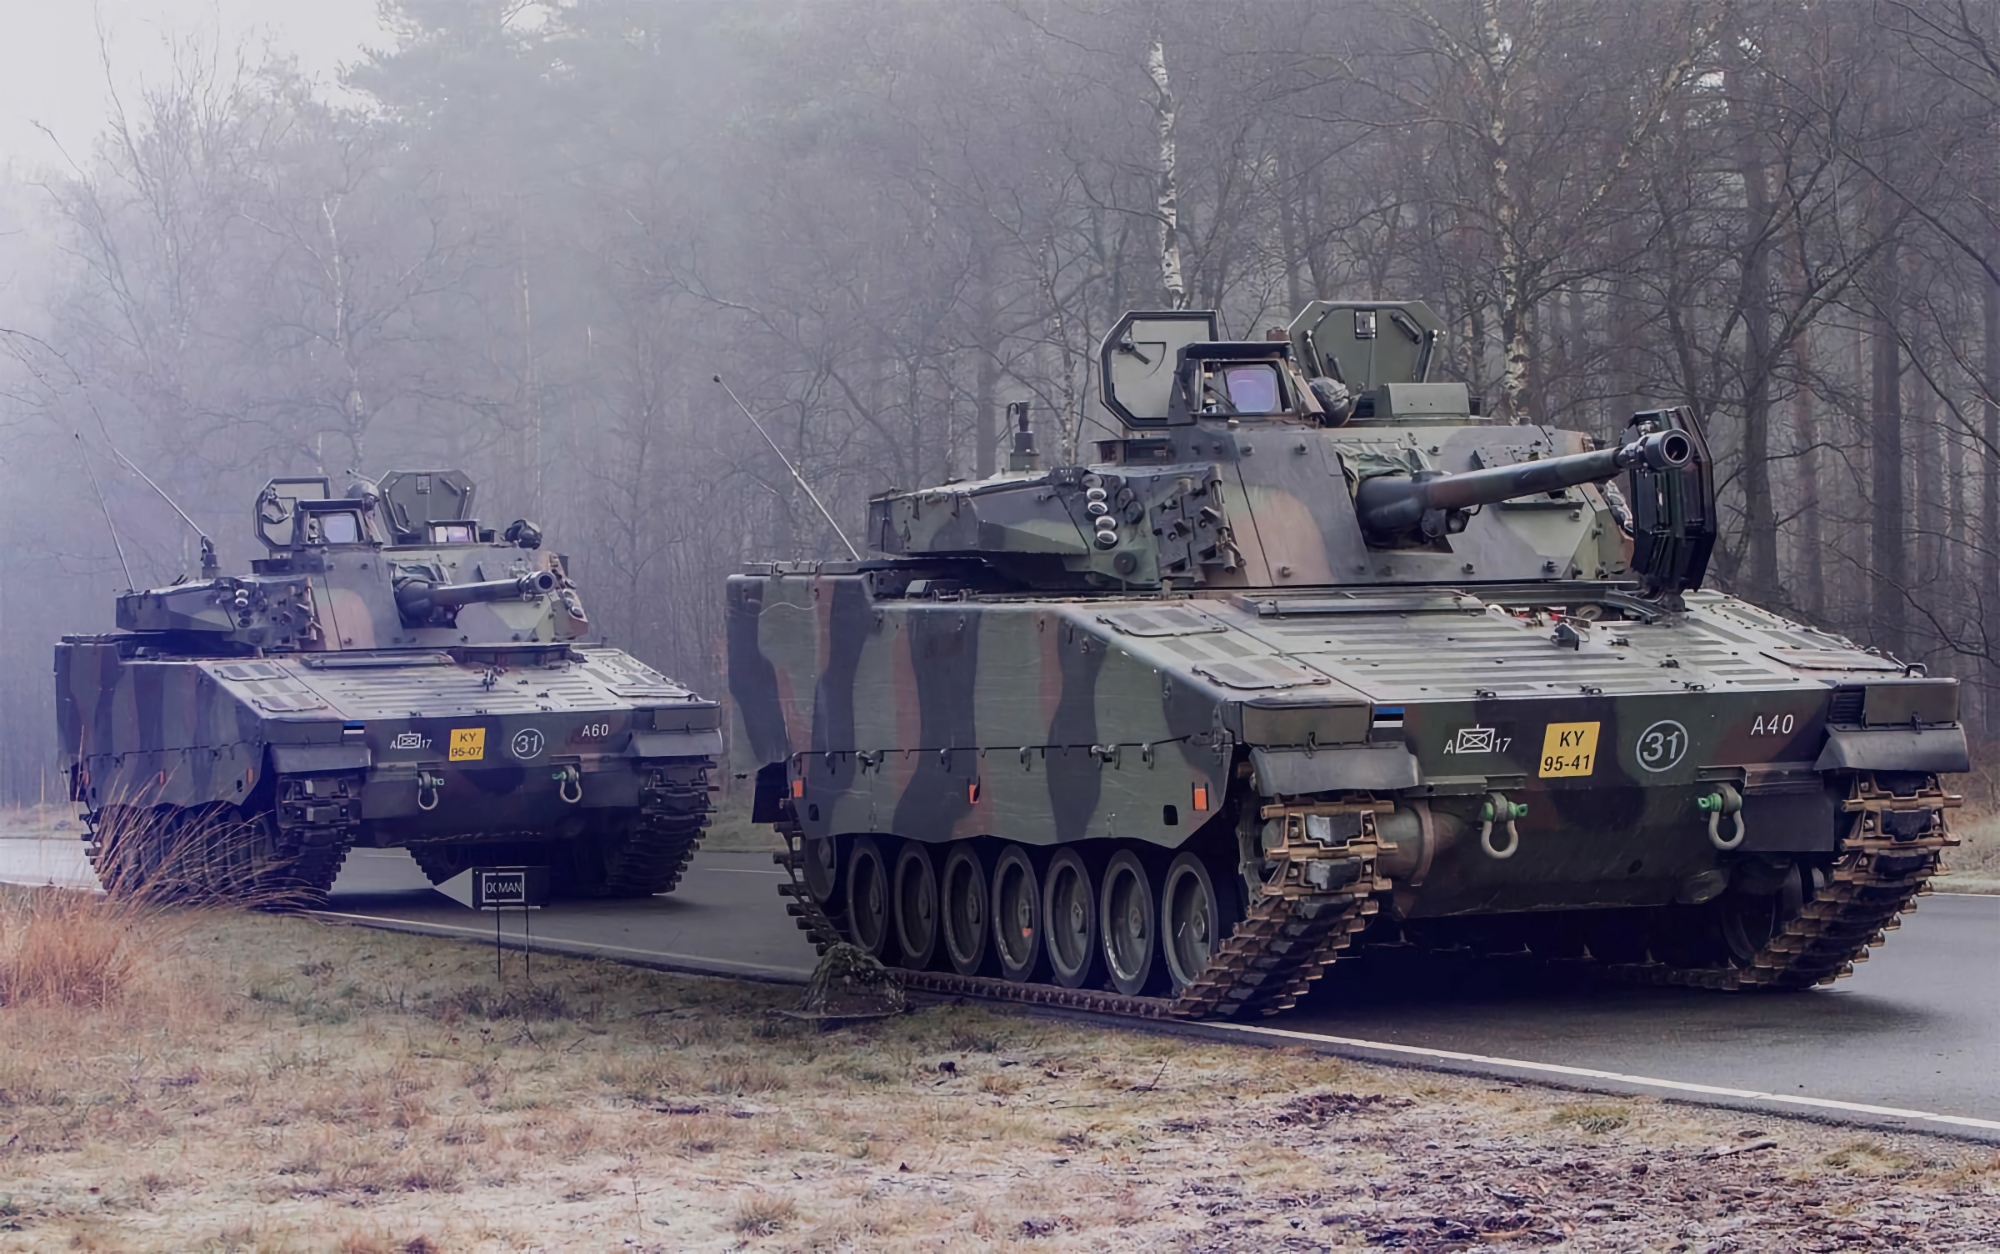 BAE Systems is developing a new version of the CV90 infantry fighting vehicle with a 35mm cannon for Sweden